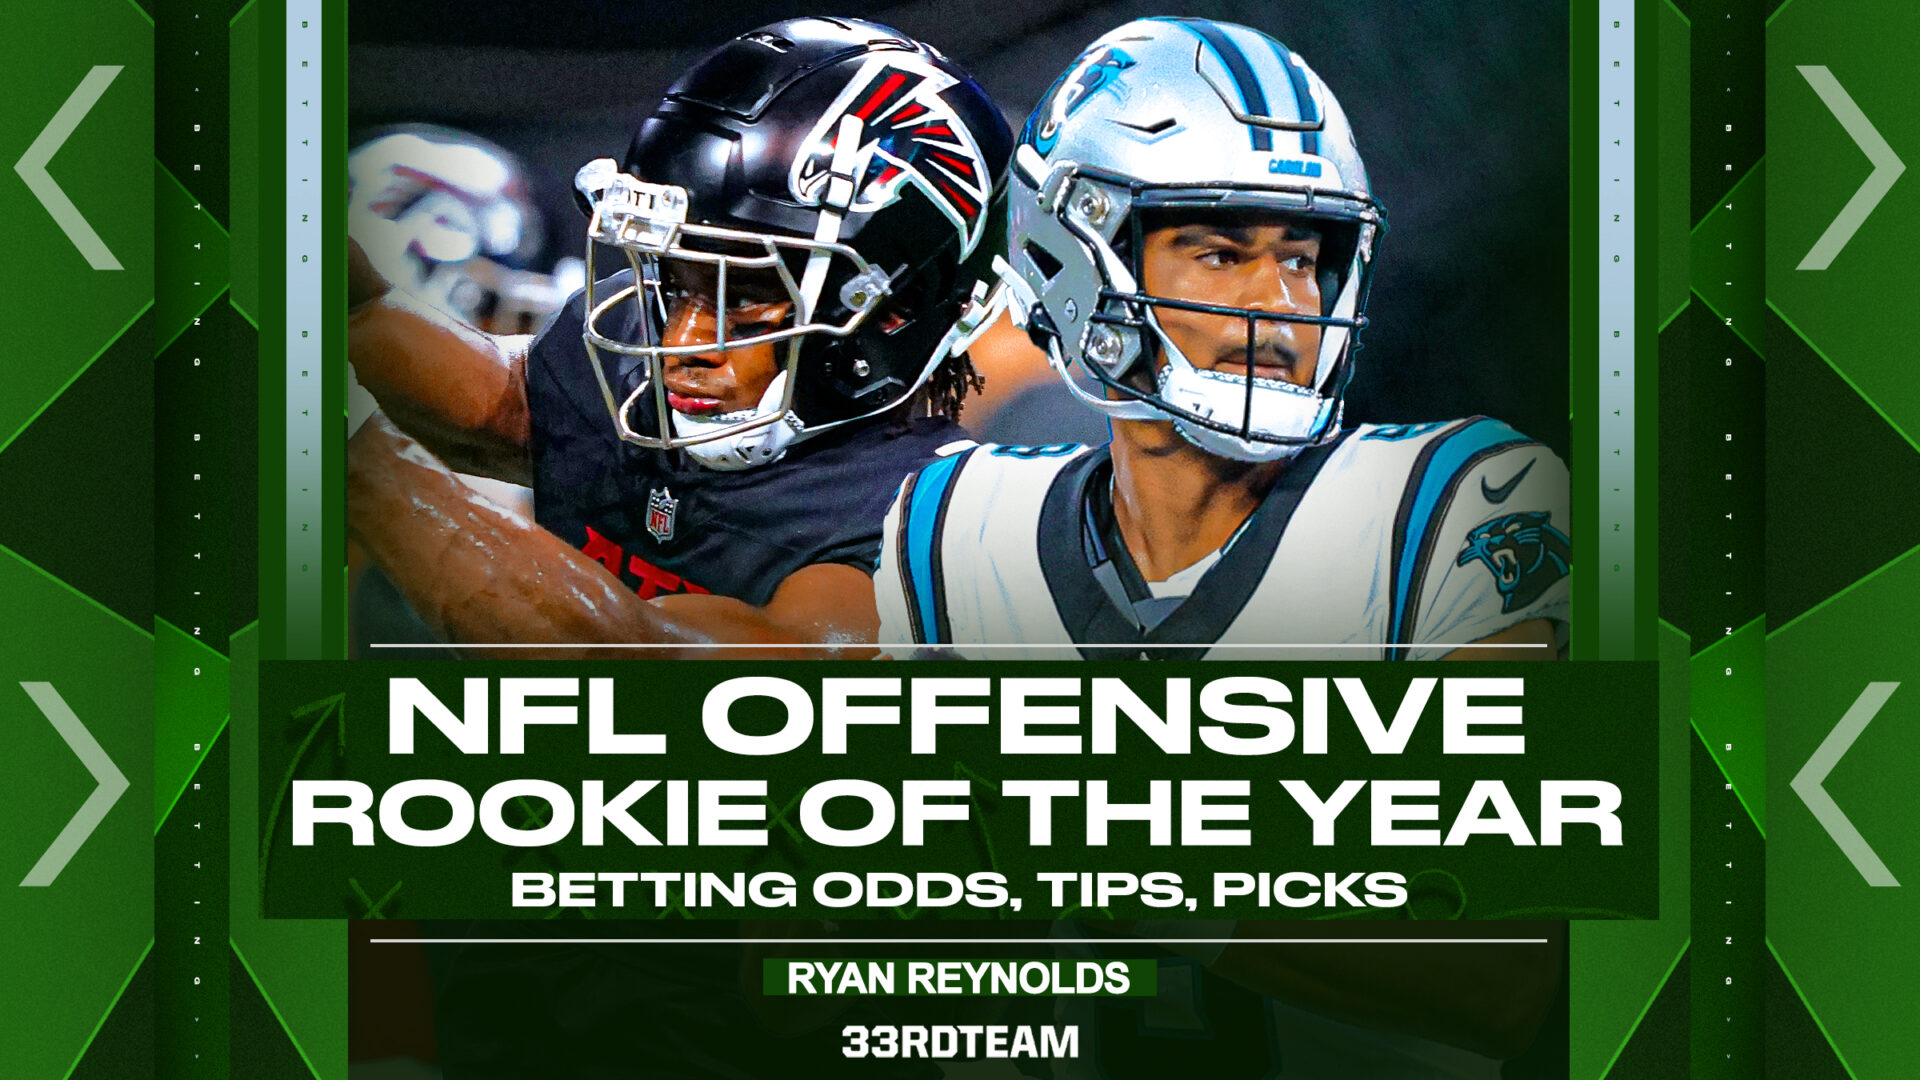 2022 NFL Rookie of the Year Odds and Best Bets - Offensive and